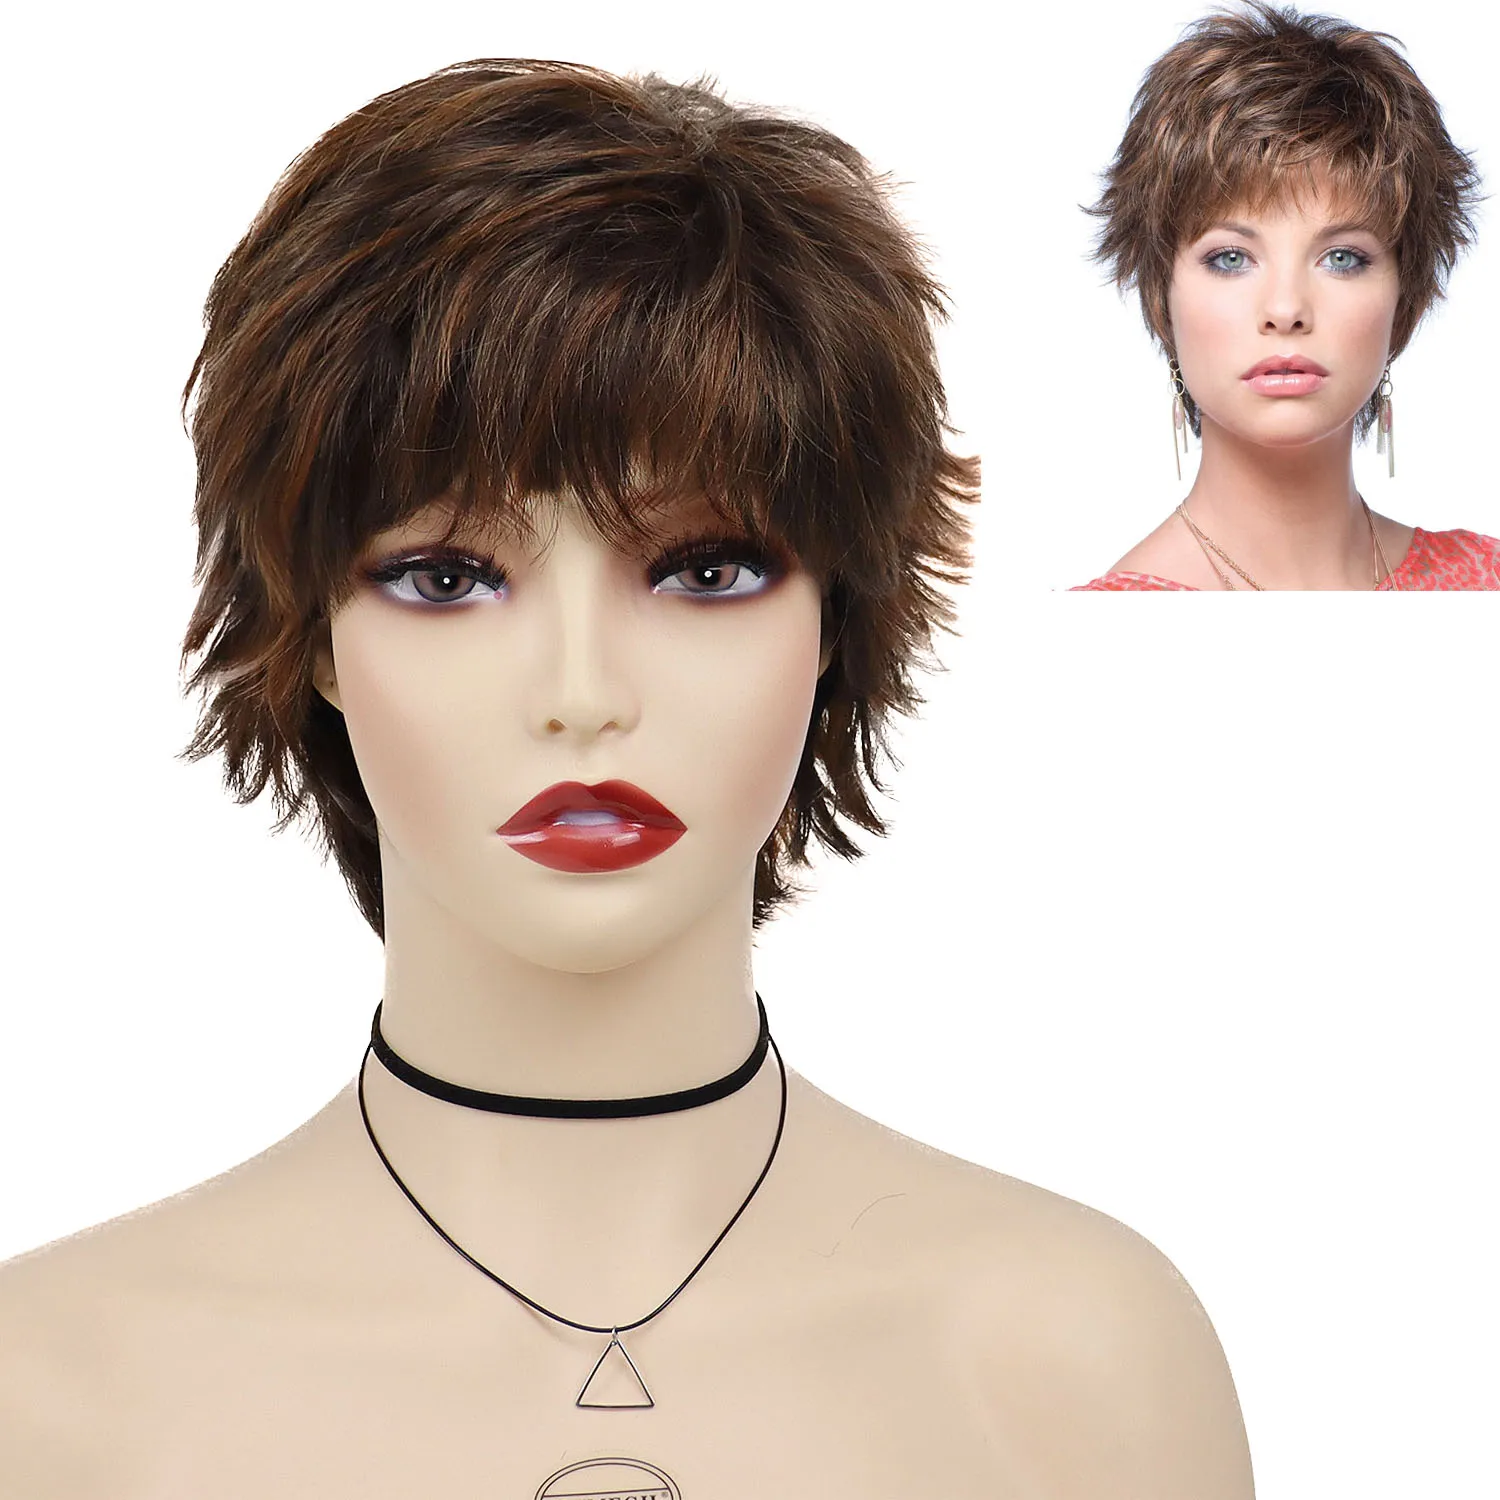 

GNIMEGIL Synthetic Wigs Short Brown for Women Pixie Cuts Wig with Bangs Natural Hairstyle for Old Lady Daily Use Party Costume